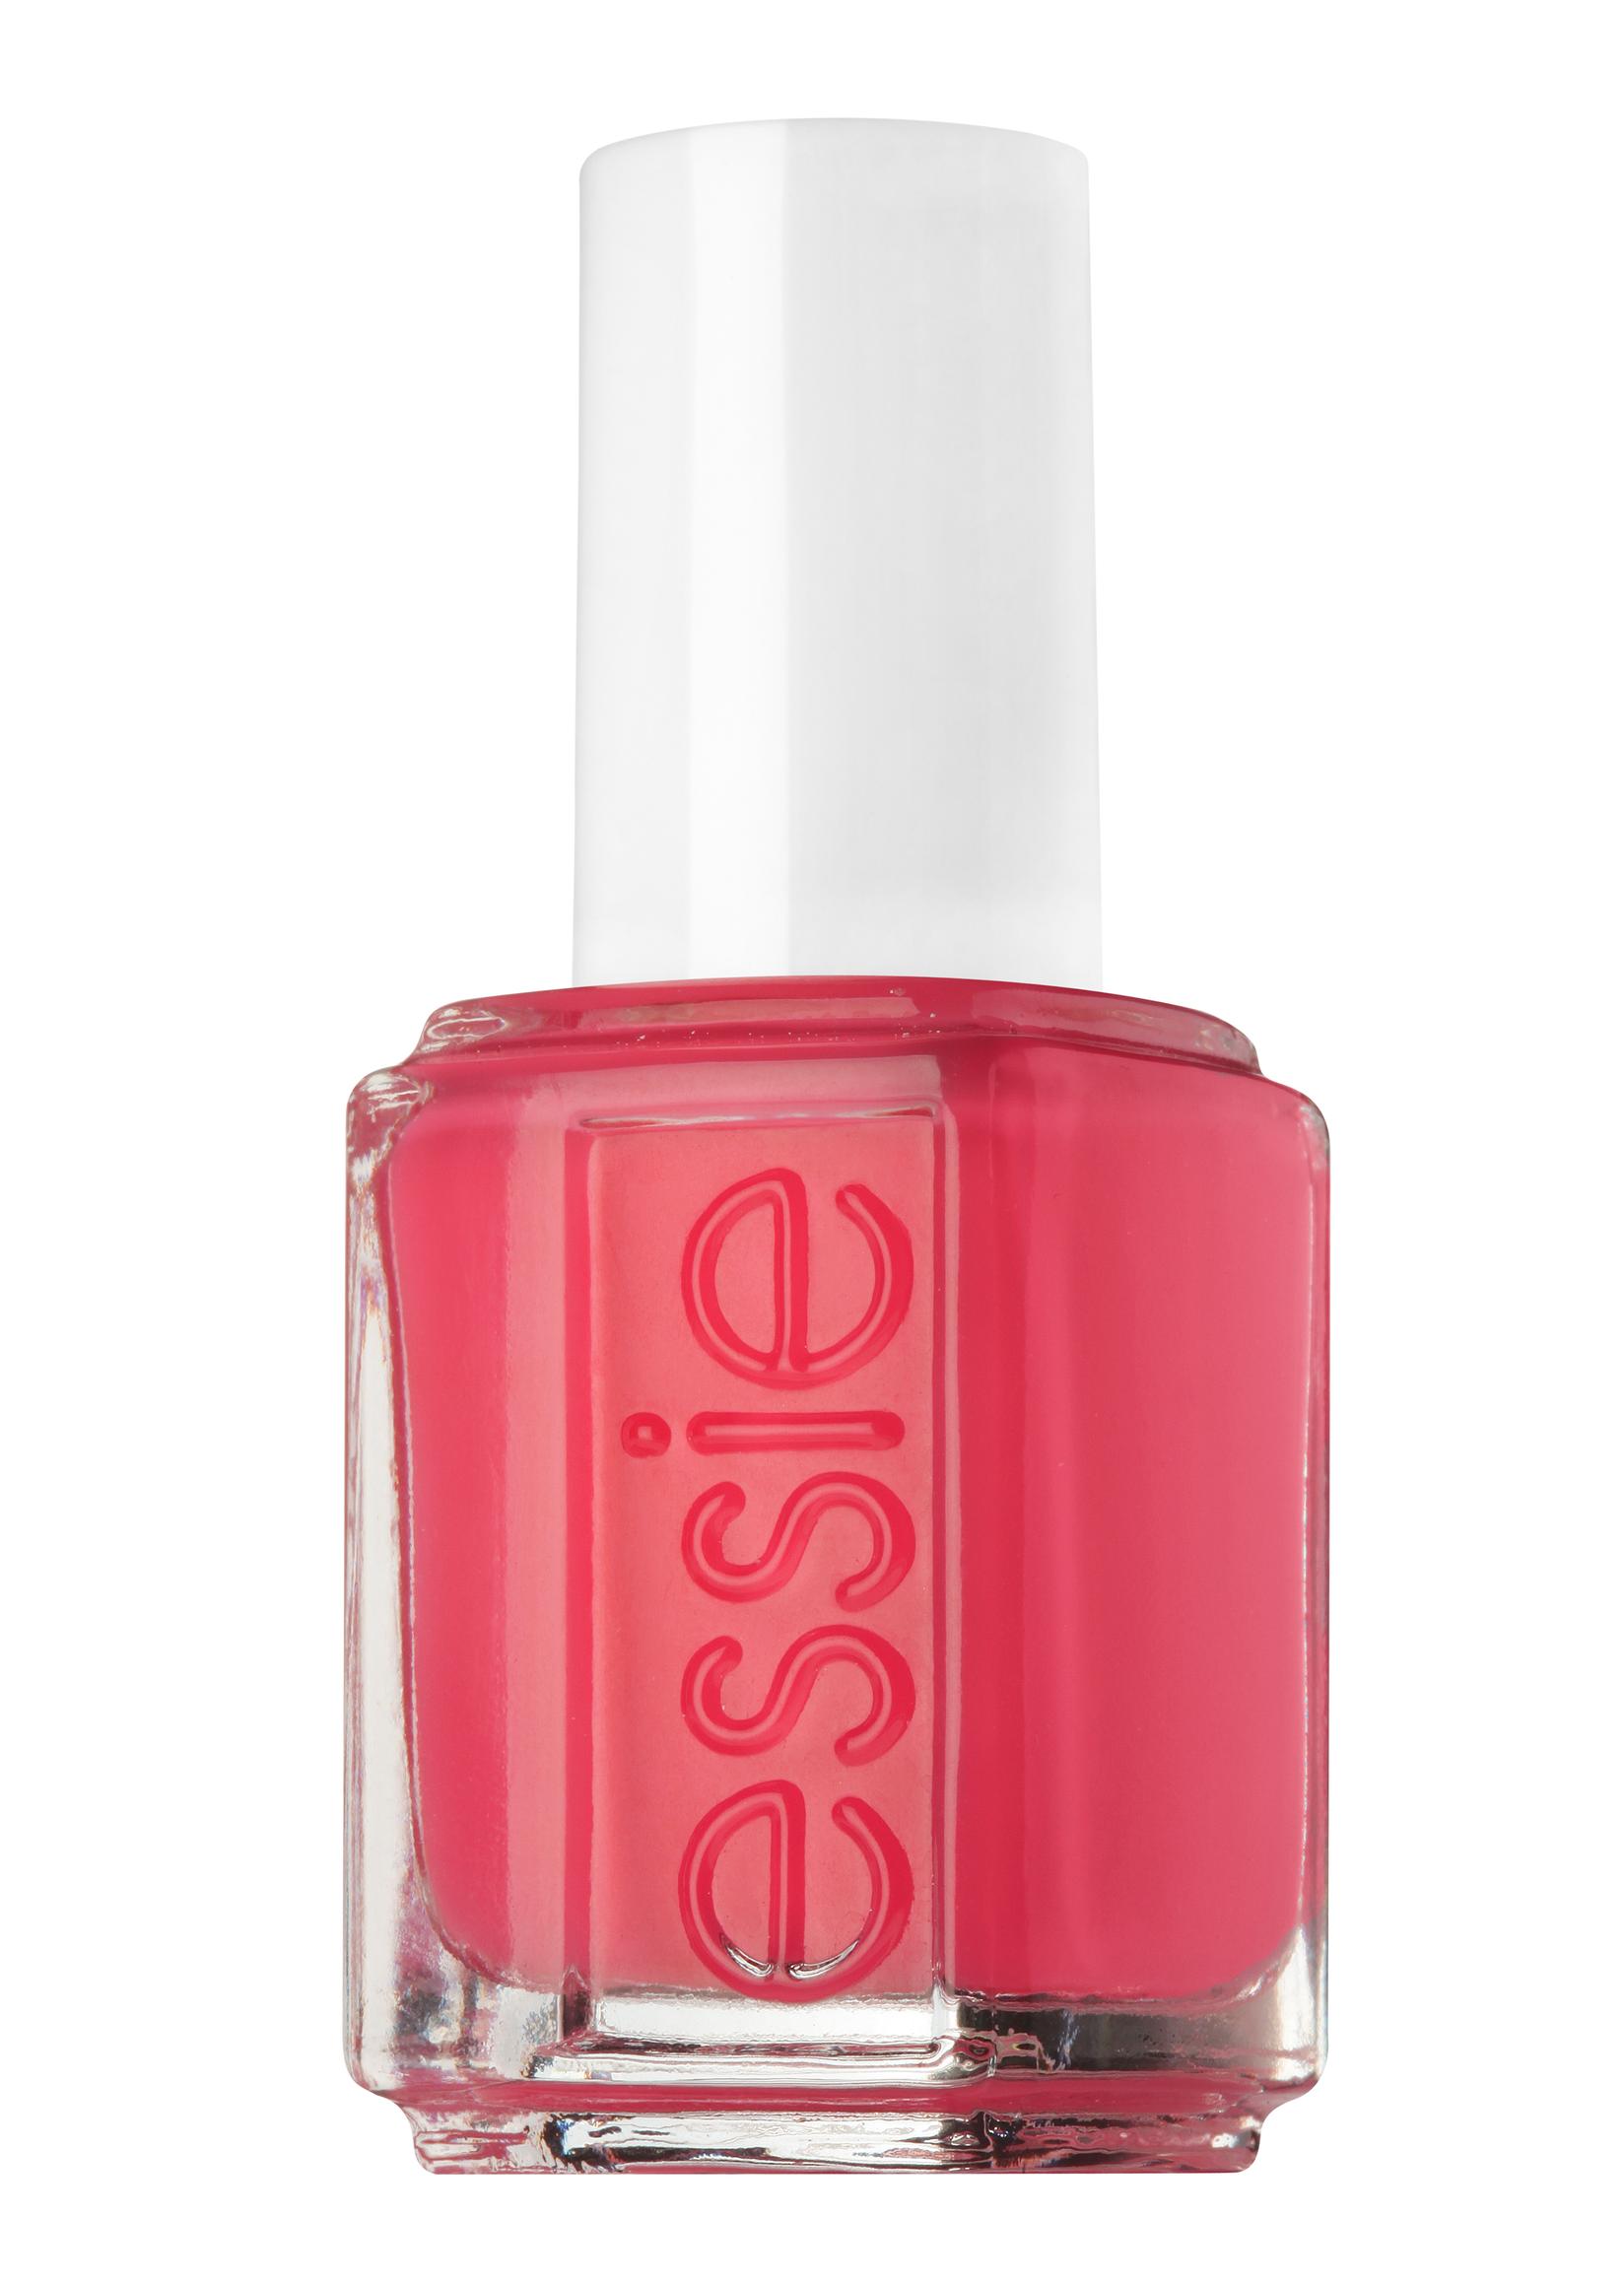 Selected image for ESSIE Lak za nokte 73 Cute As a Button